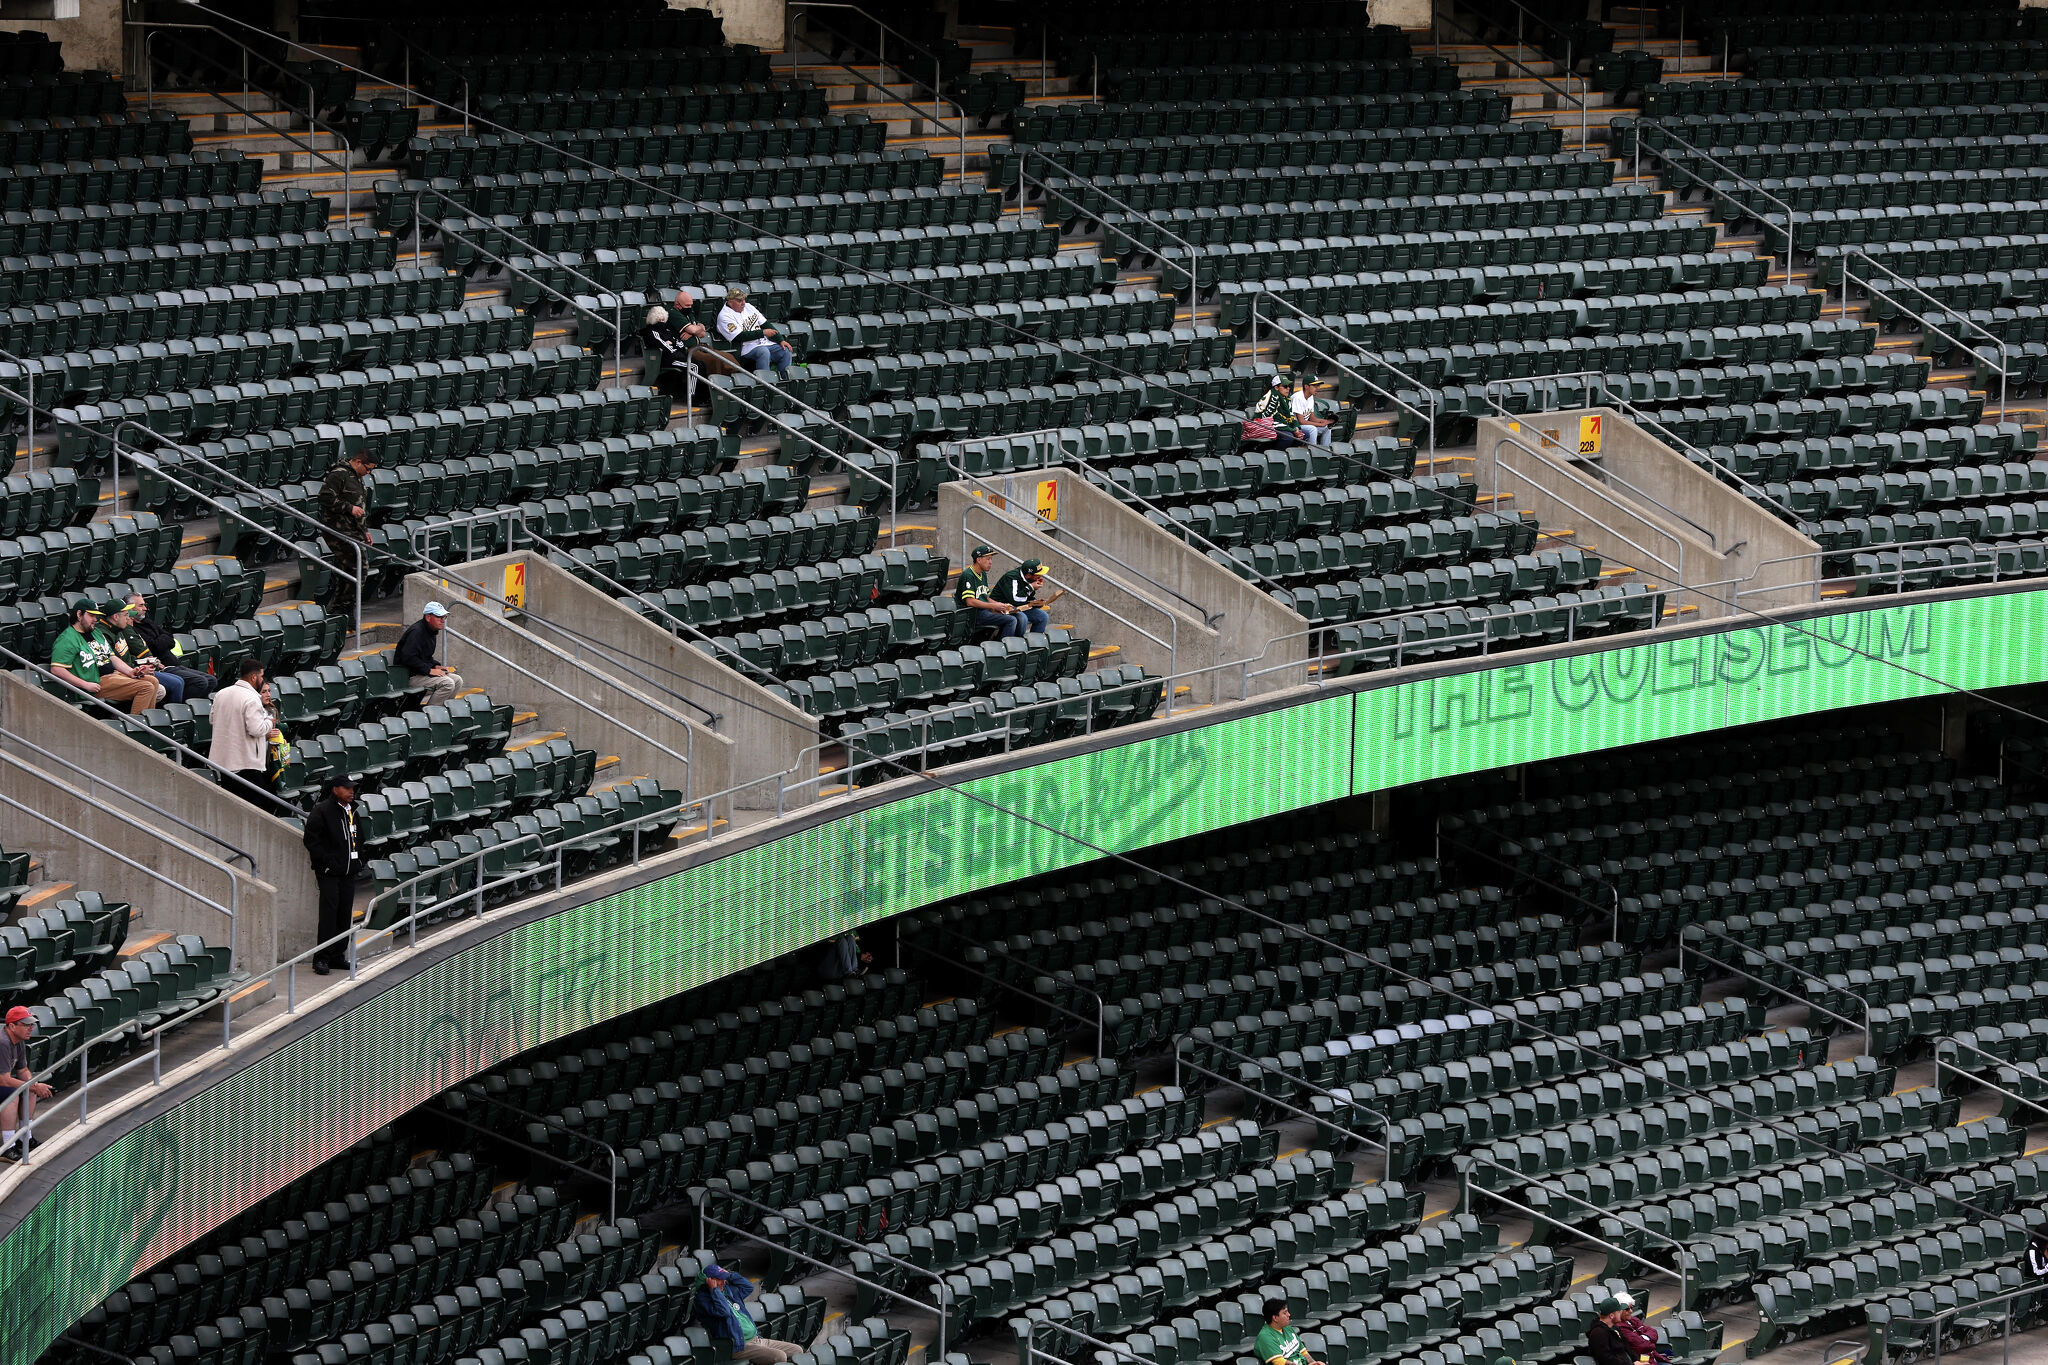 Couple allegedly having sex at Oakland Athletics game is now being  investigated by police